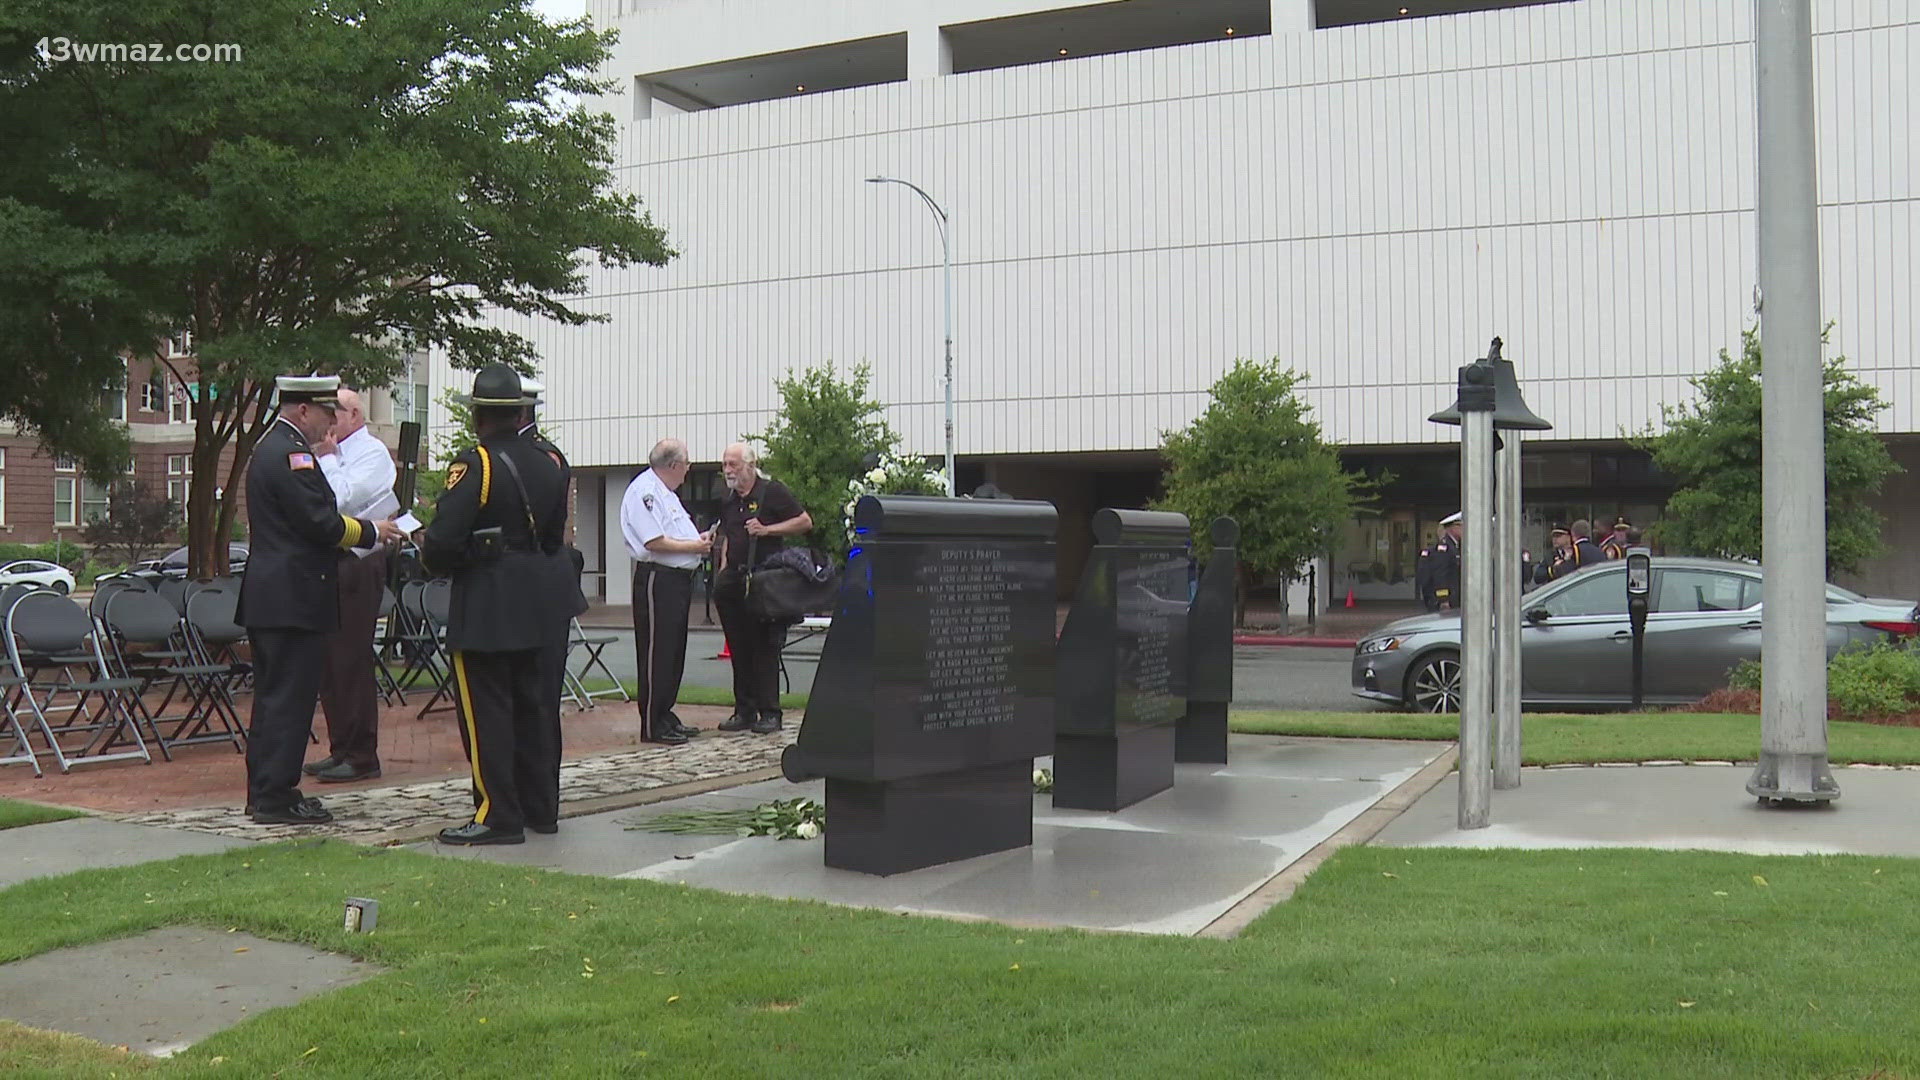 "This is to let the fallen, the members of those who have fallen, that we will never forget," Warren Selby said.